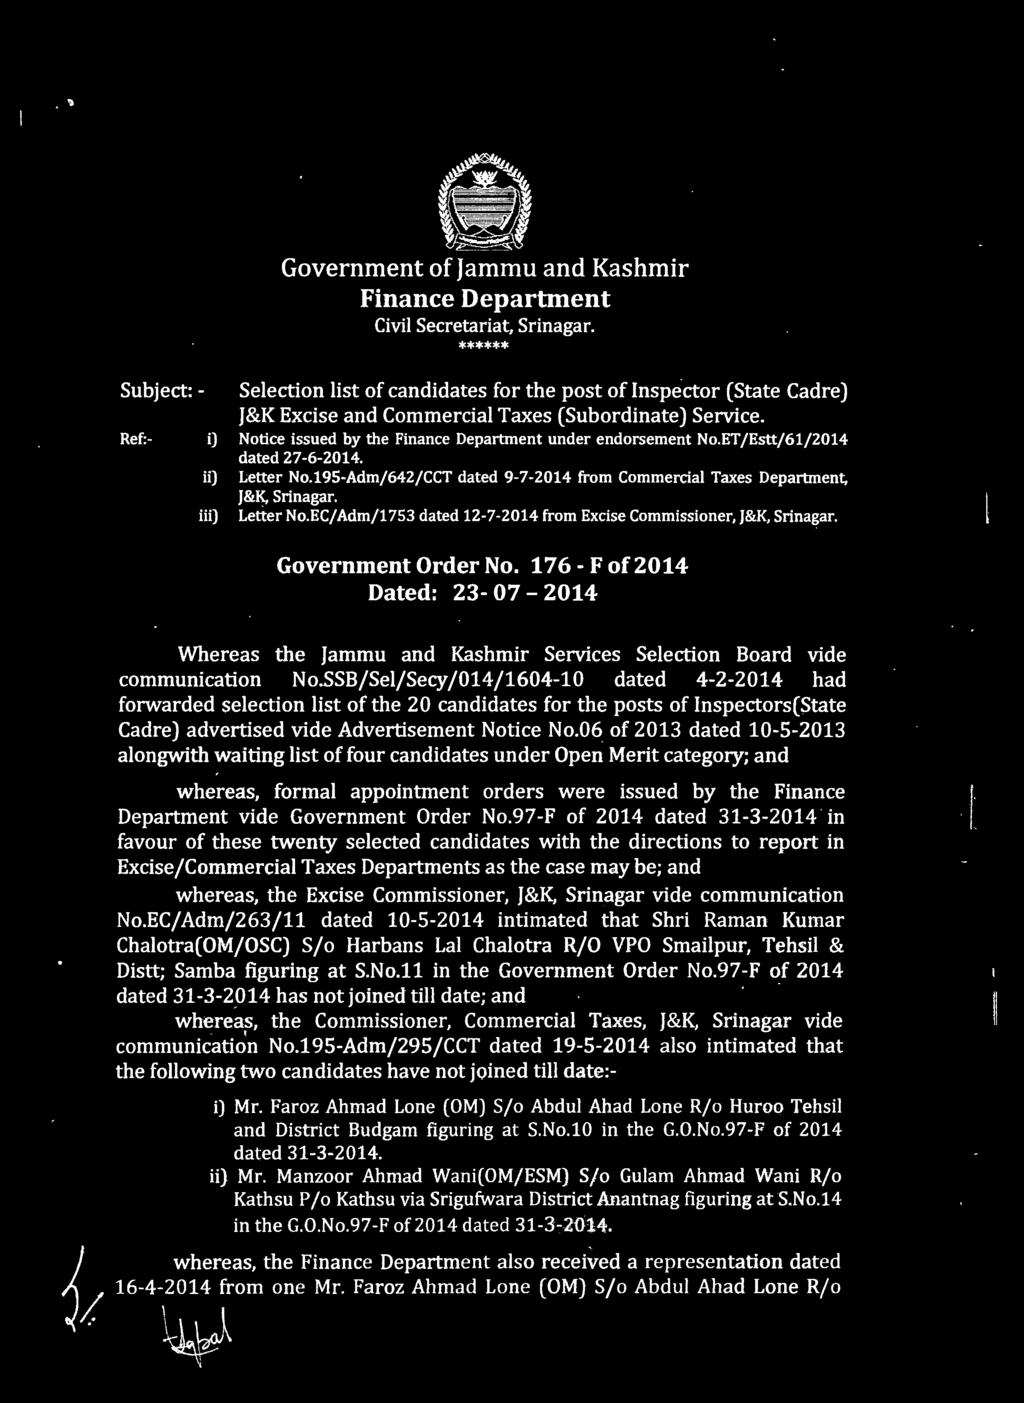 ET/Estt/61/2014 dated 27-6-2014. ii) Letter No.195-Adm/642/CCT dated 9-7-2014 from Commercial Taxes Department, J&K, Srinagar. iii) Letter No.